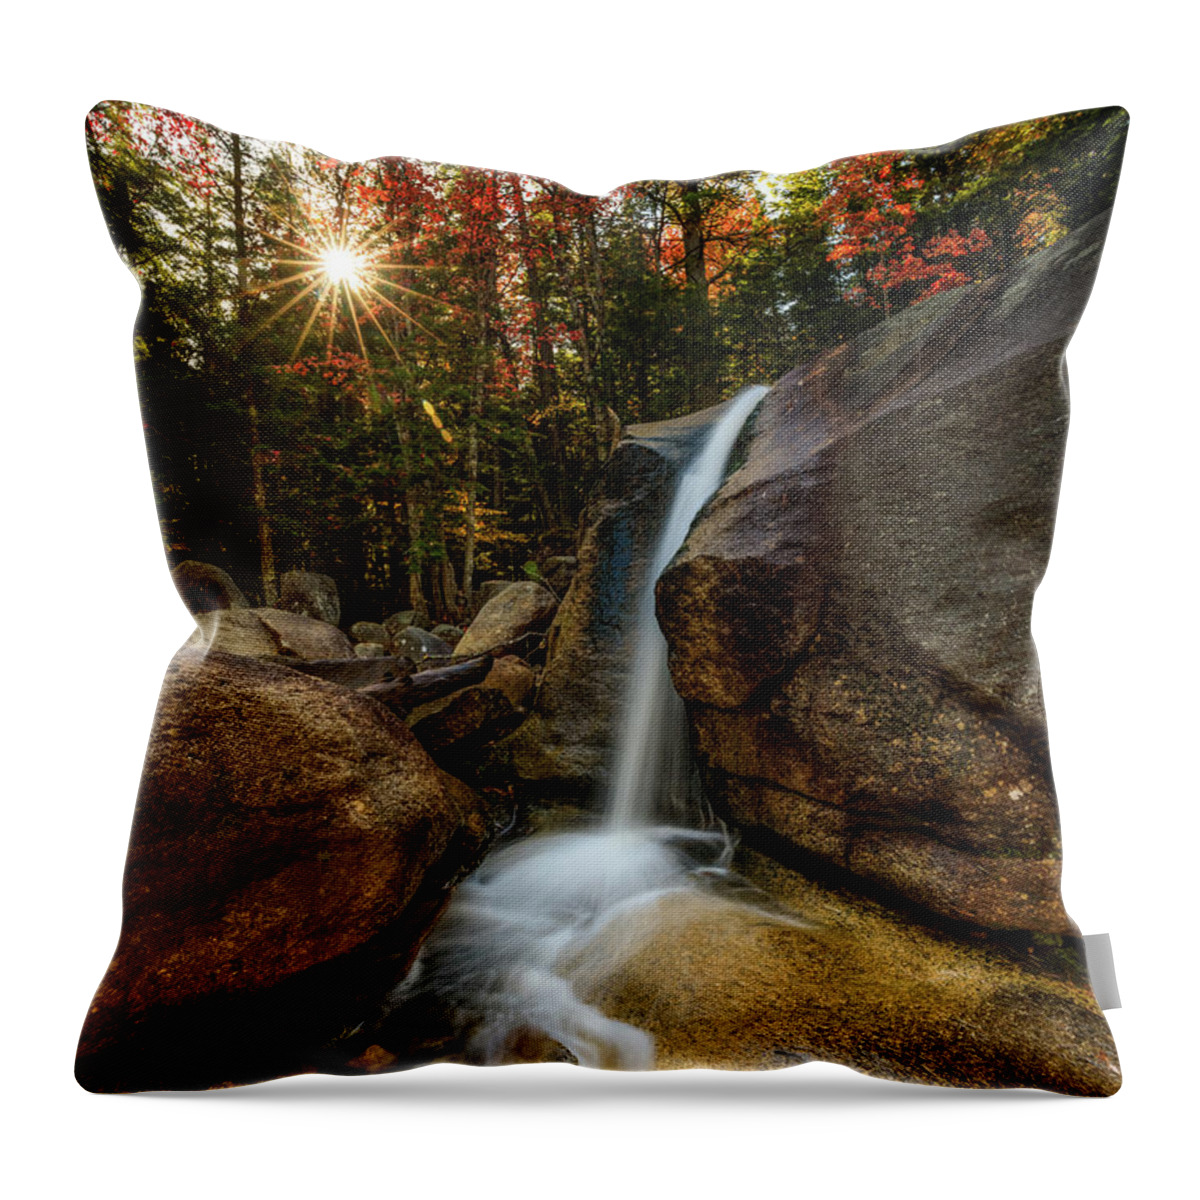 Waterfall; New Hampshire; New England; Diana's Baths; Fall; Falls; Sunstar; Trees; Sunrise; Long Exposure; Motion; Rocks; Flow; Mood; Autumn; Leaves; Colors; Rob Davies; Photography Throw Pillow featuring the photograph Diana's Baths by Rob Davies